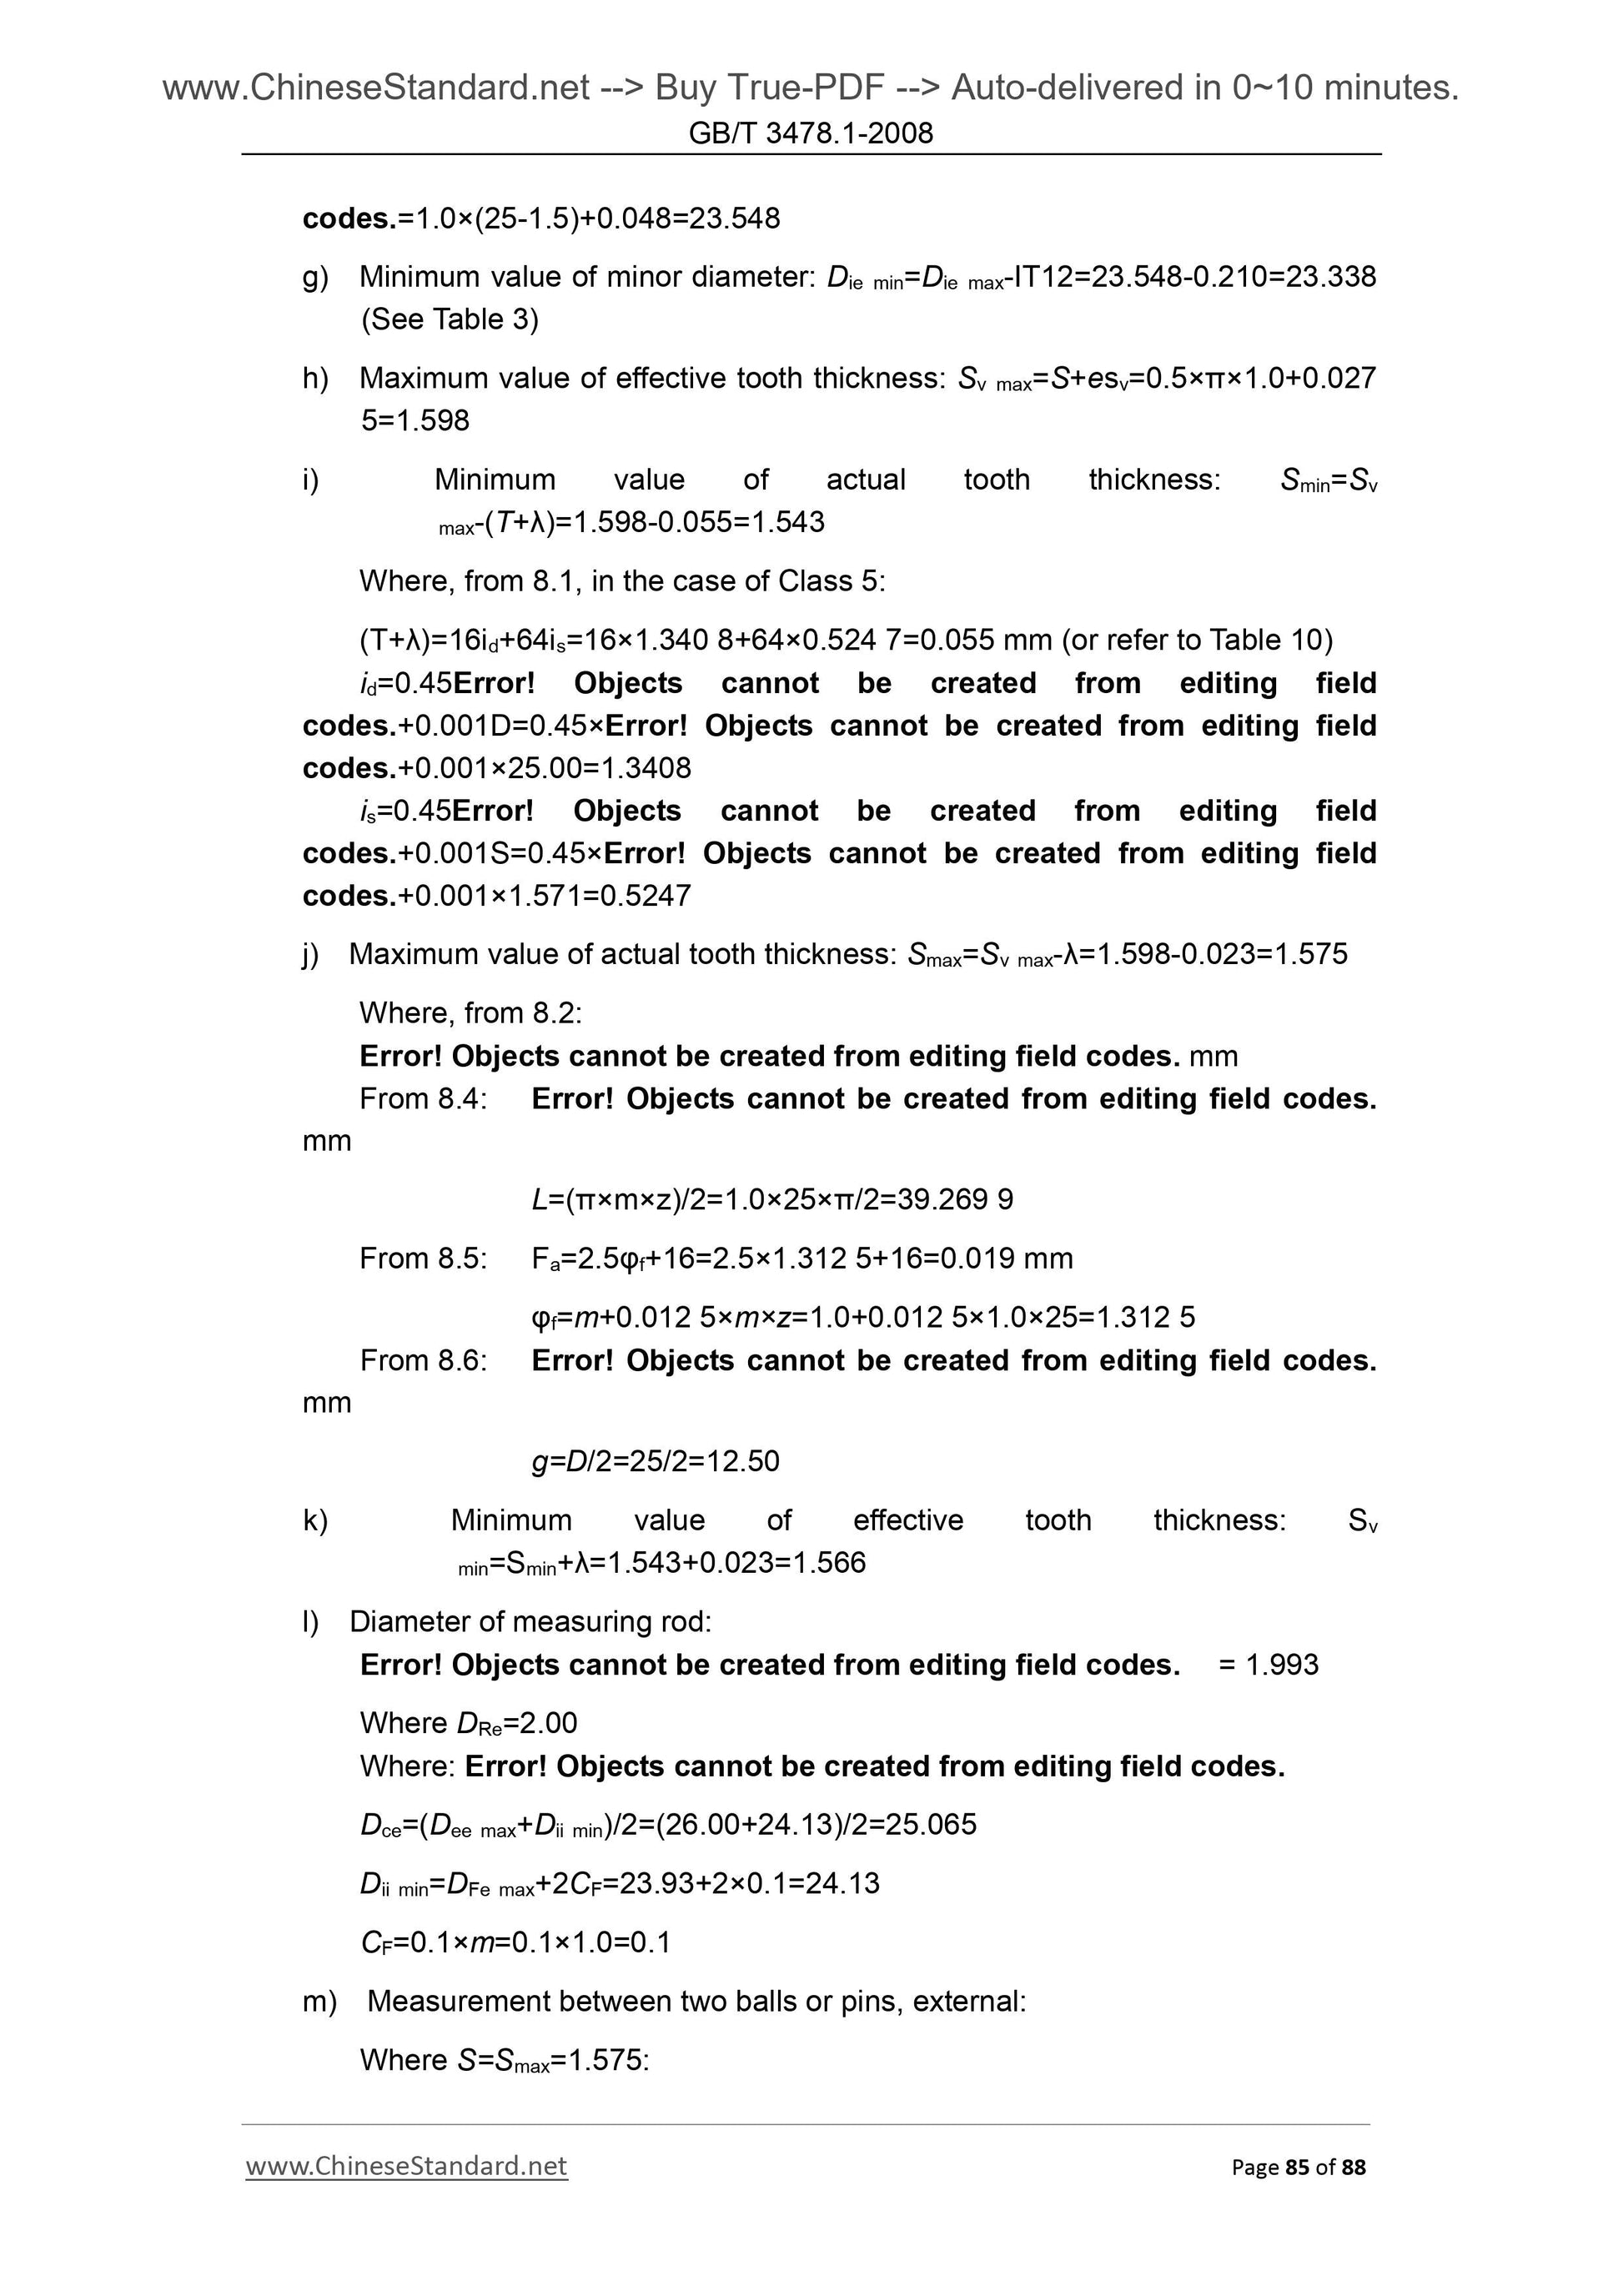 GB/T 3478.1-2008 Page 12